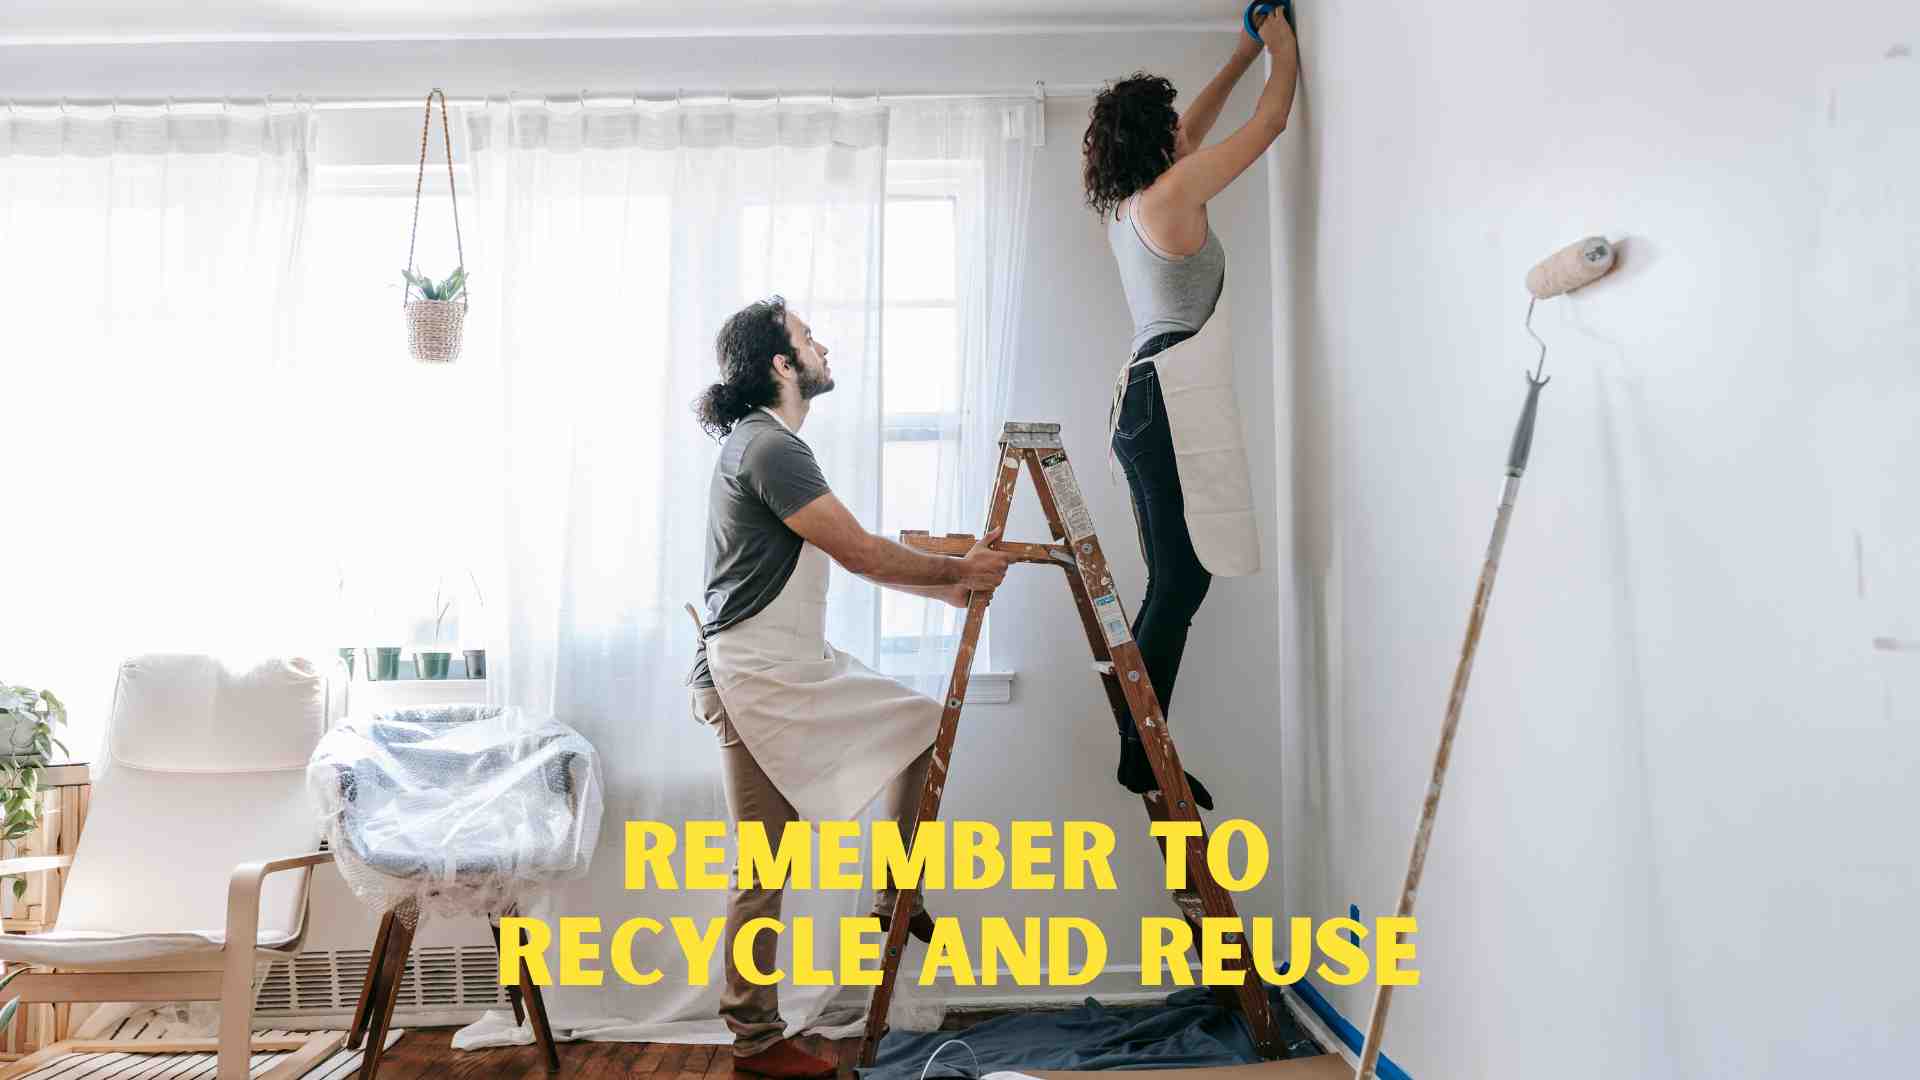 Remember to recycle and reuse